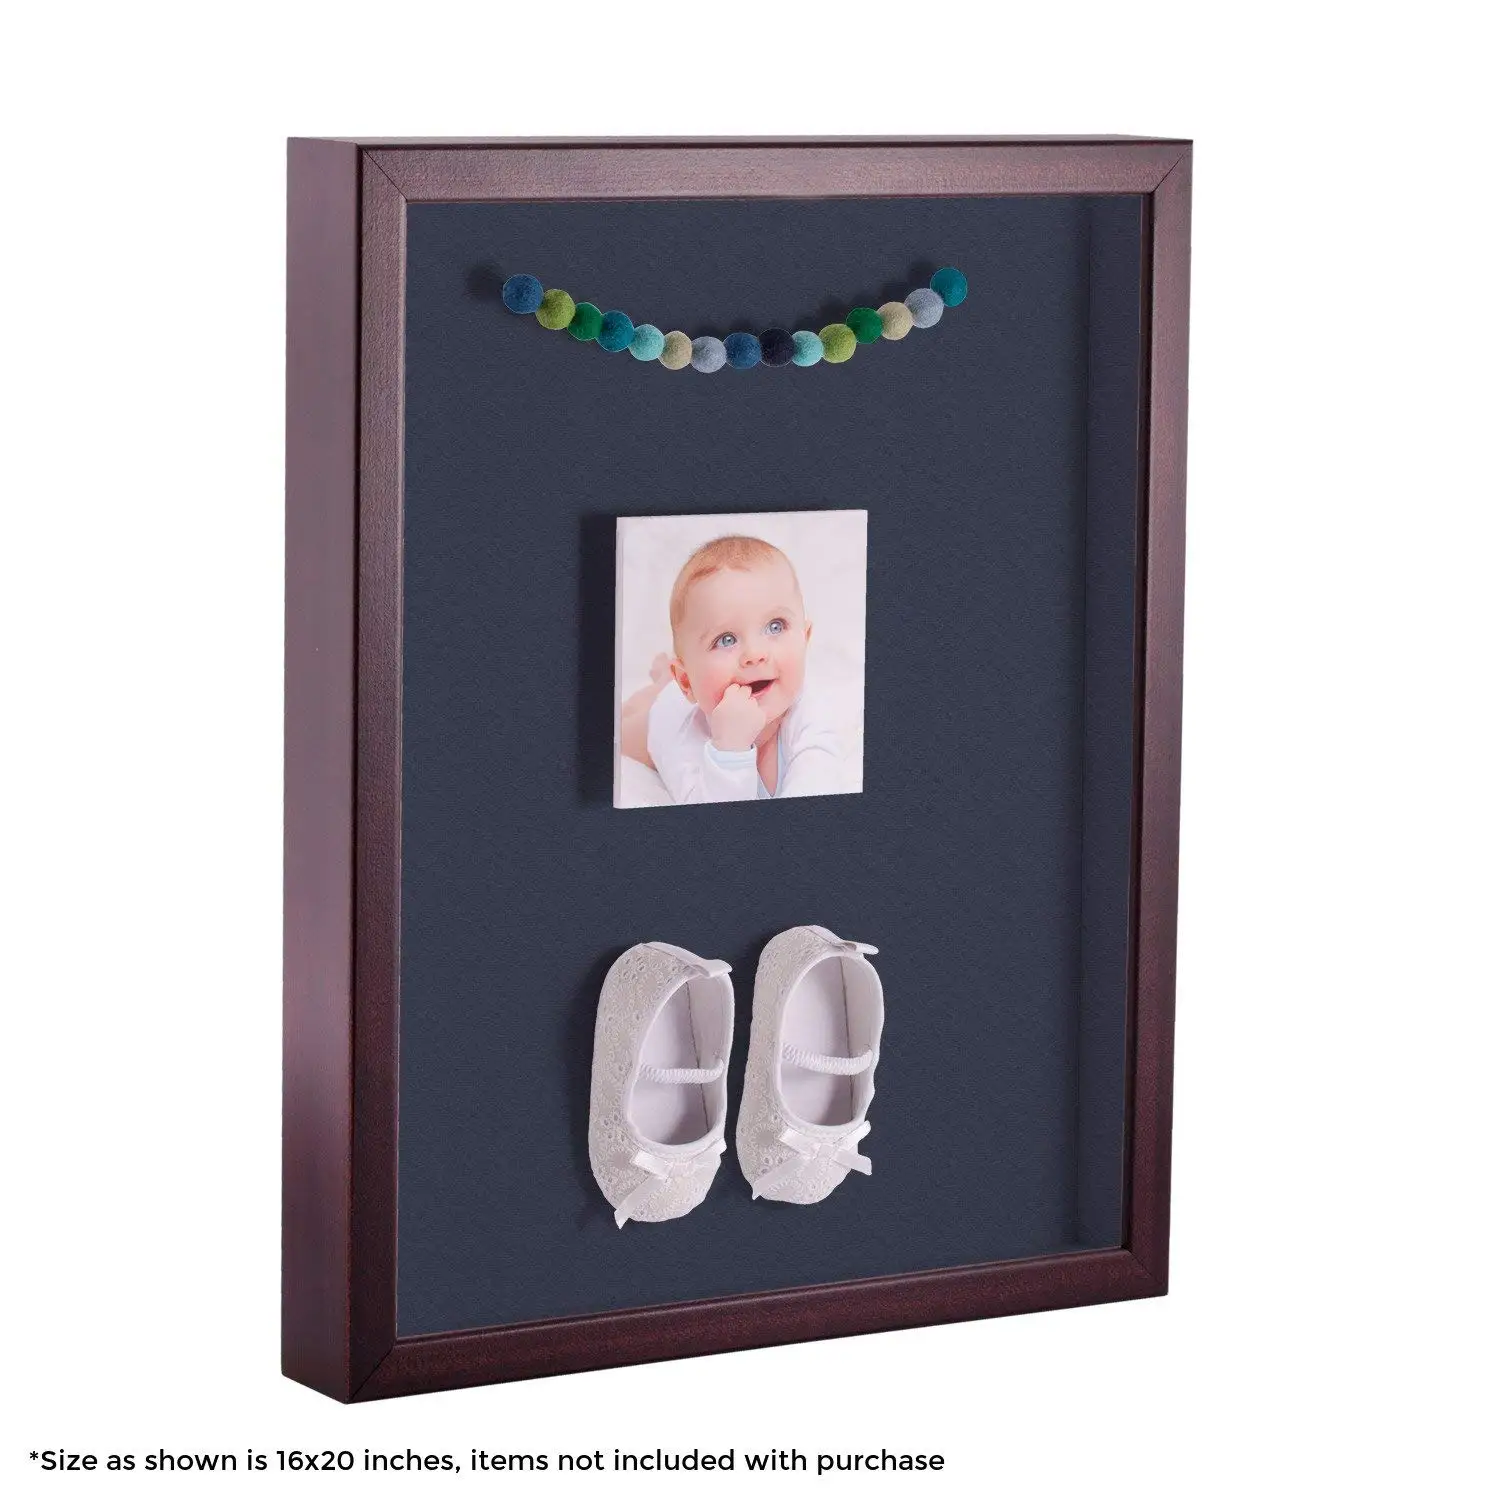 Cheap Frame 12 X 16 Find Frame 12 X 16 Deals On Line At Alibaba Com